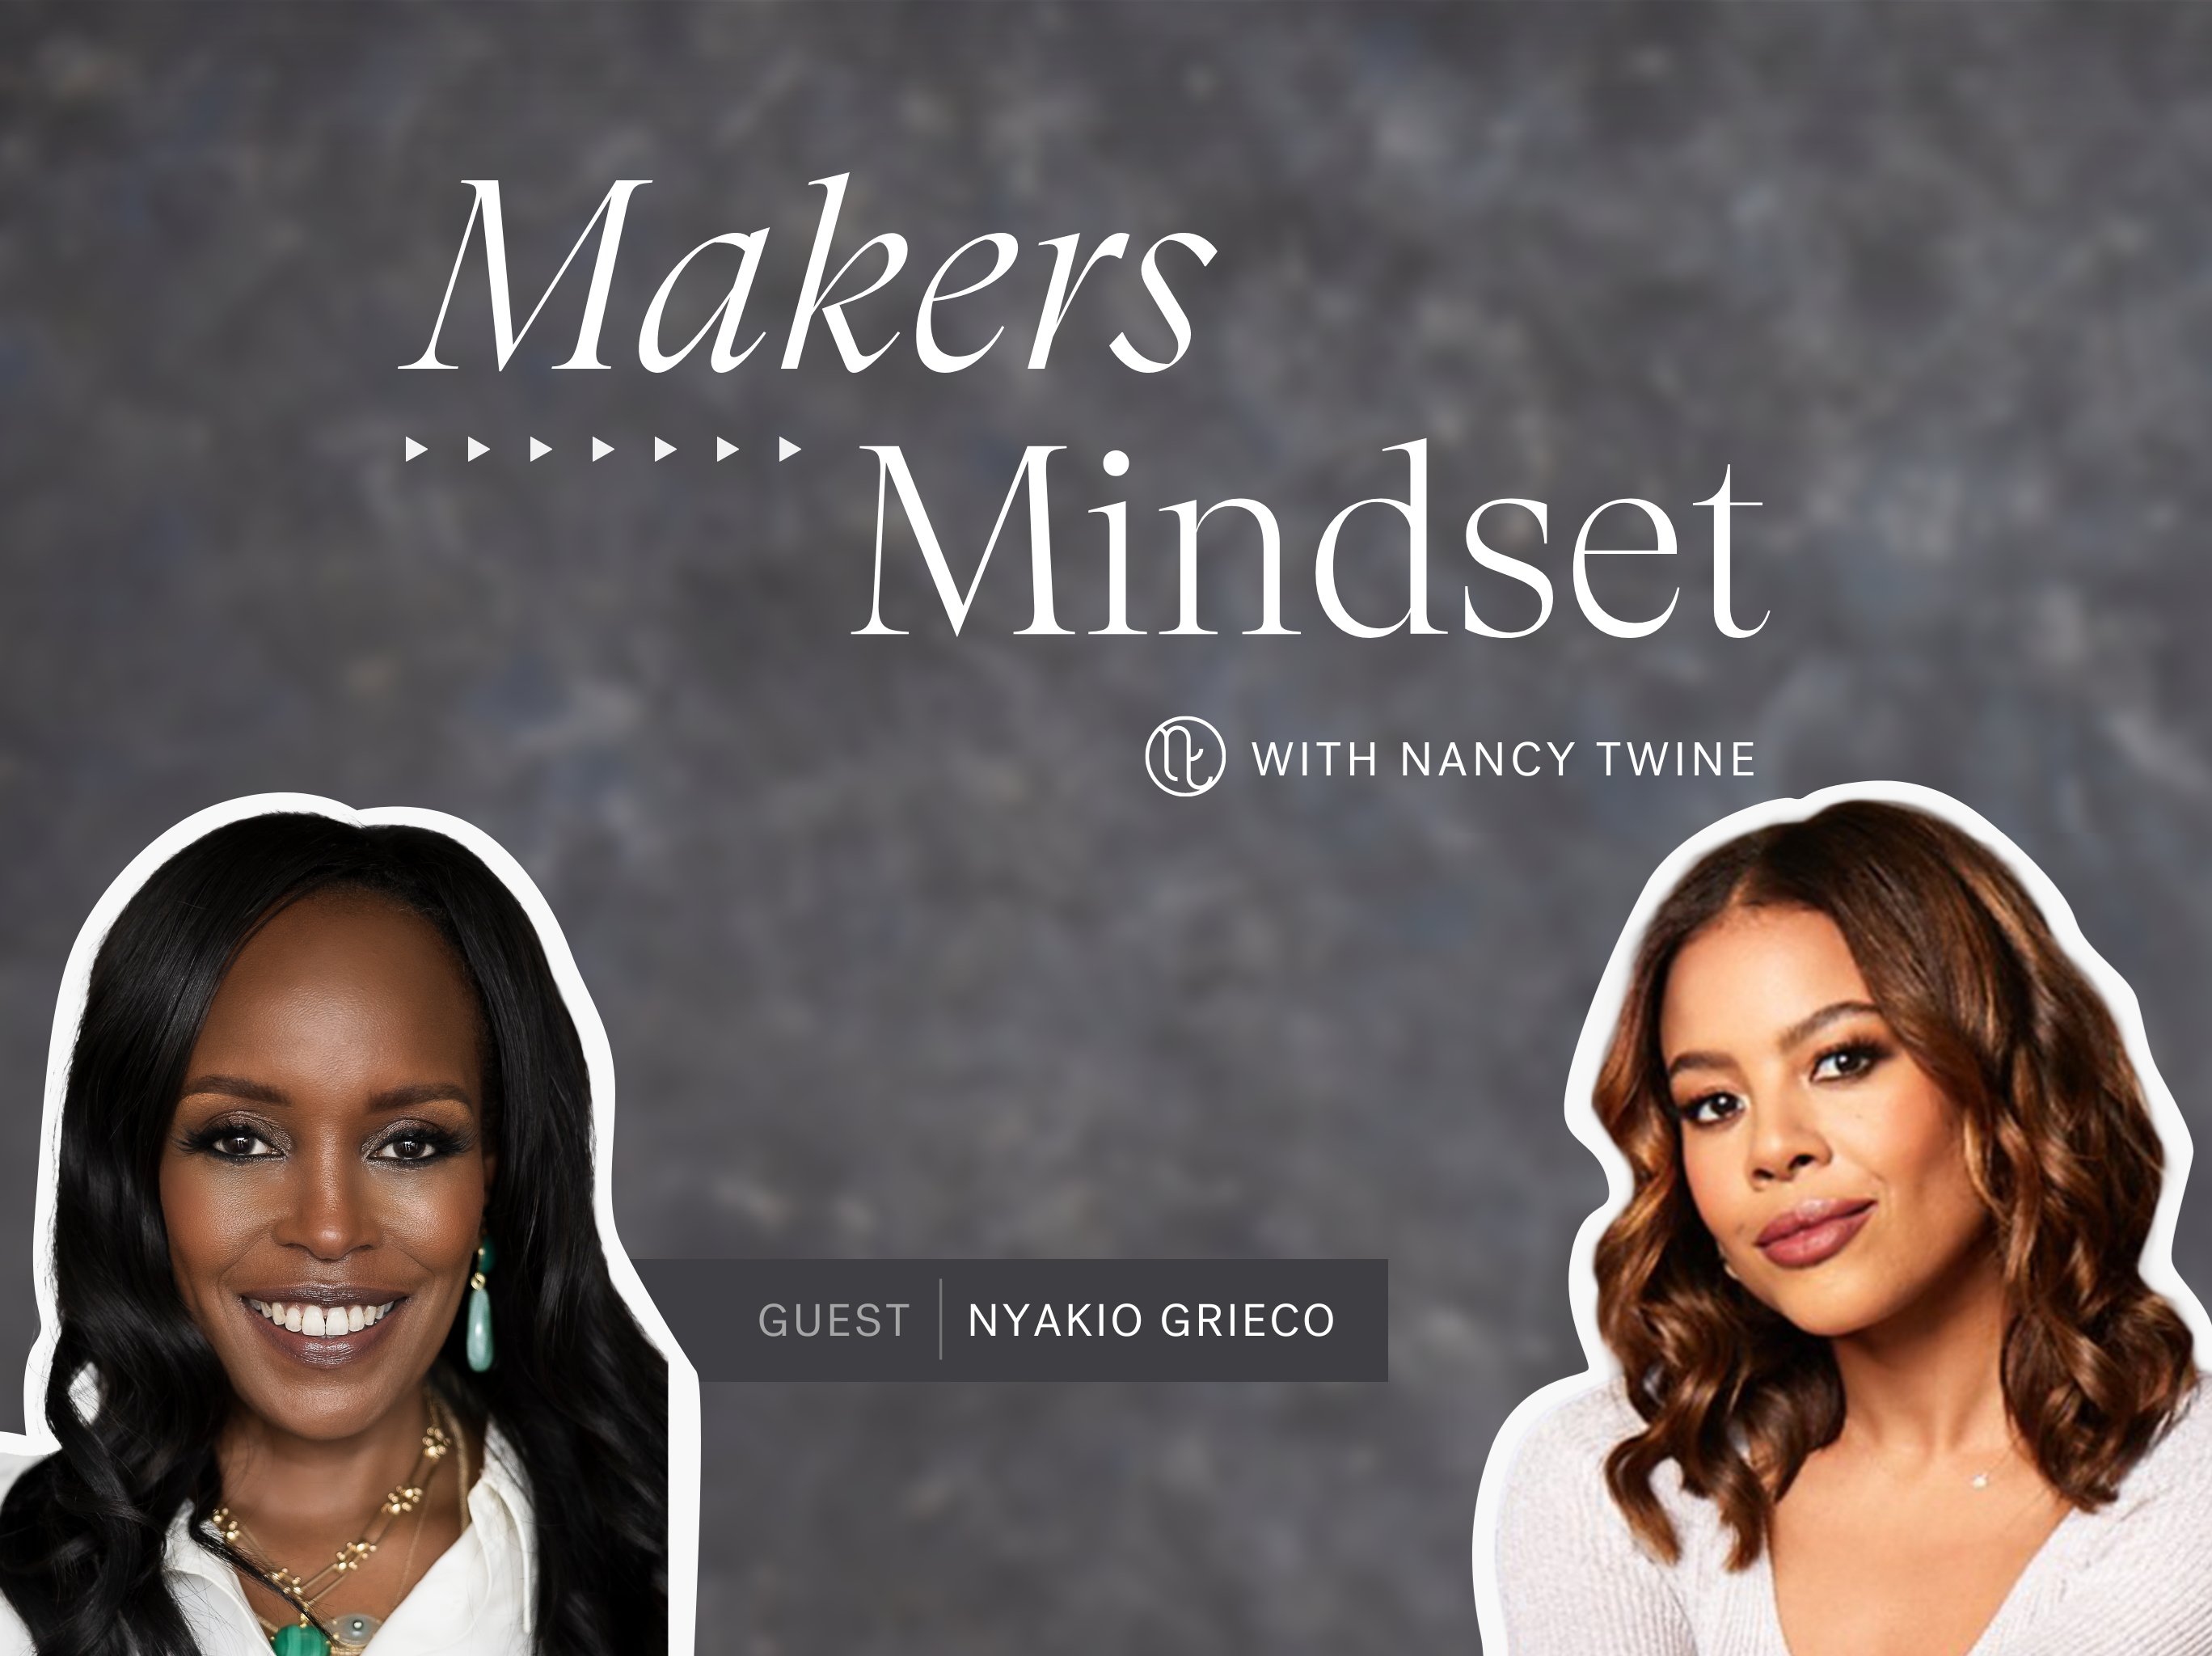 Cover image for Makers Mindset Season 1 Episode 8 hosted by Nancy Twine with Nyakio Grieco, Co-Founder of Thirteen Lune and Founder of Relevant: Your Skin Seen